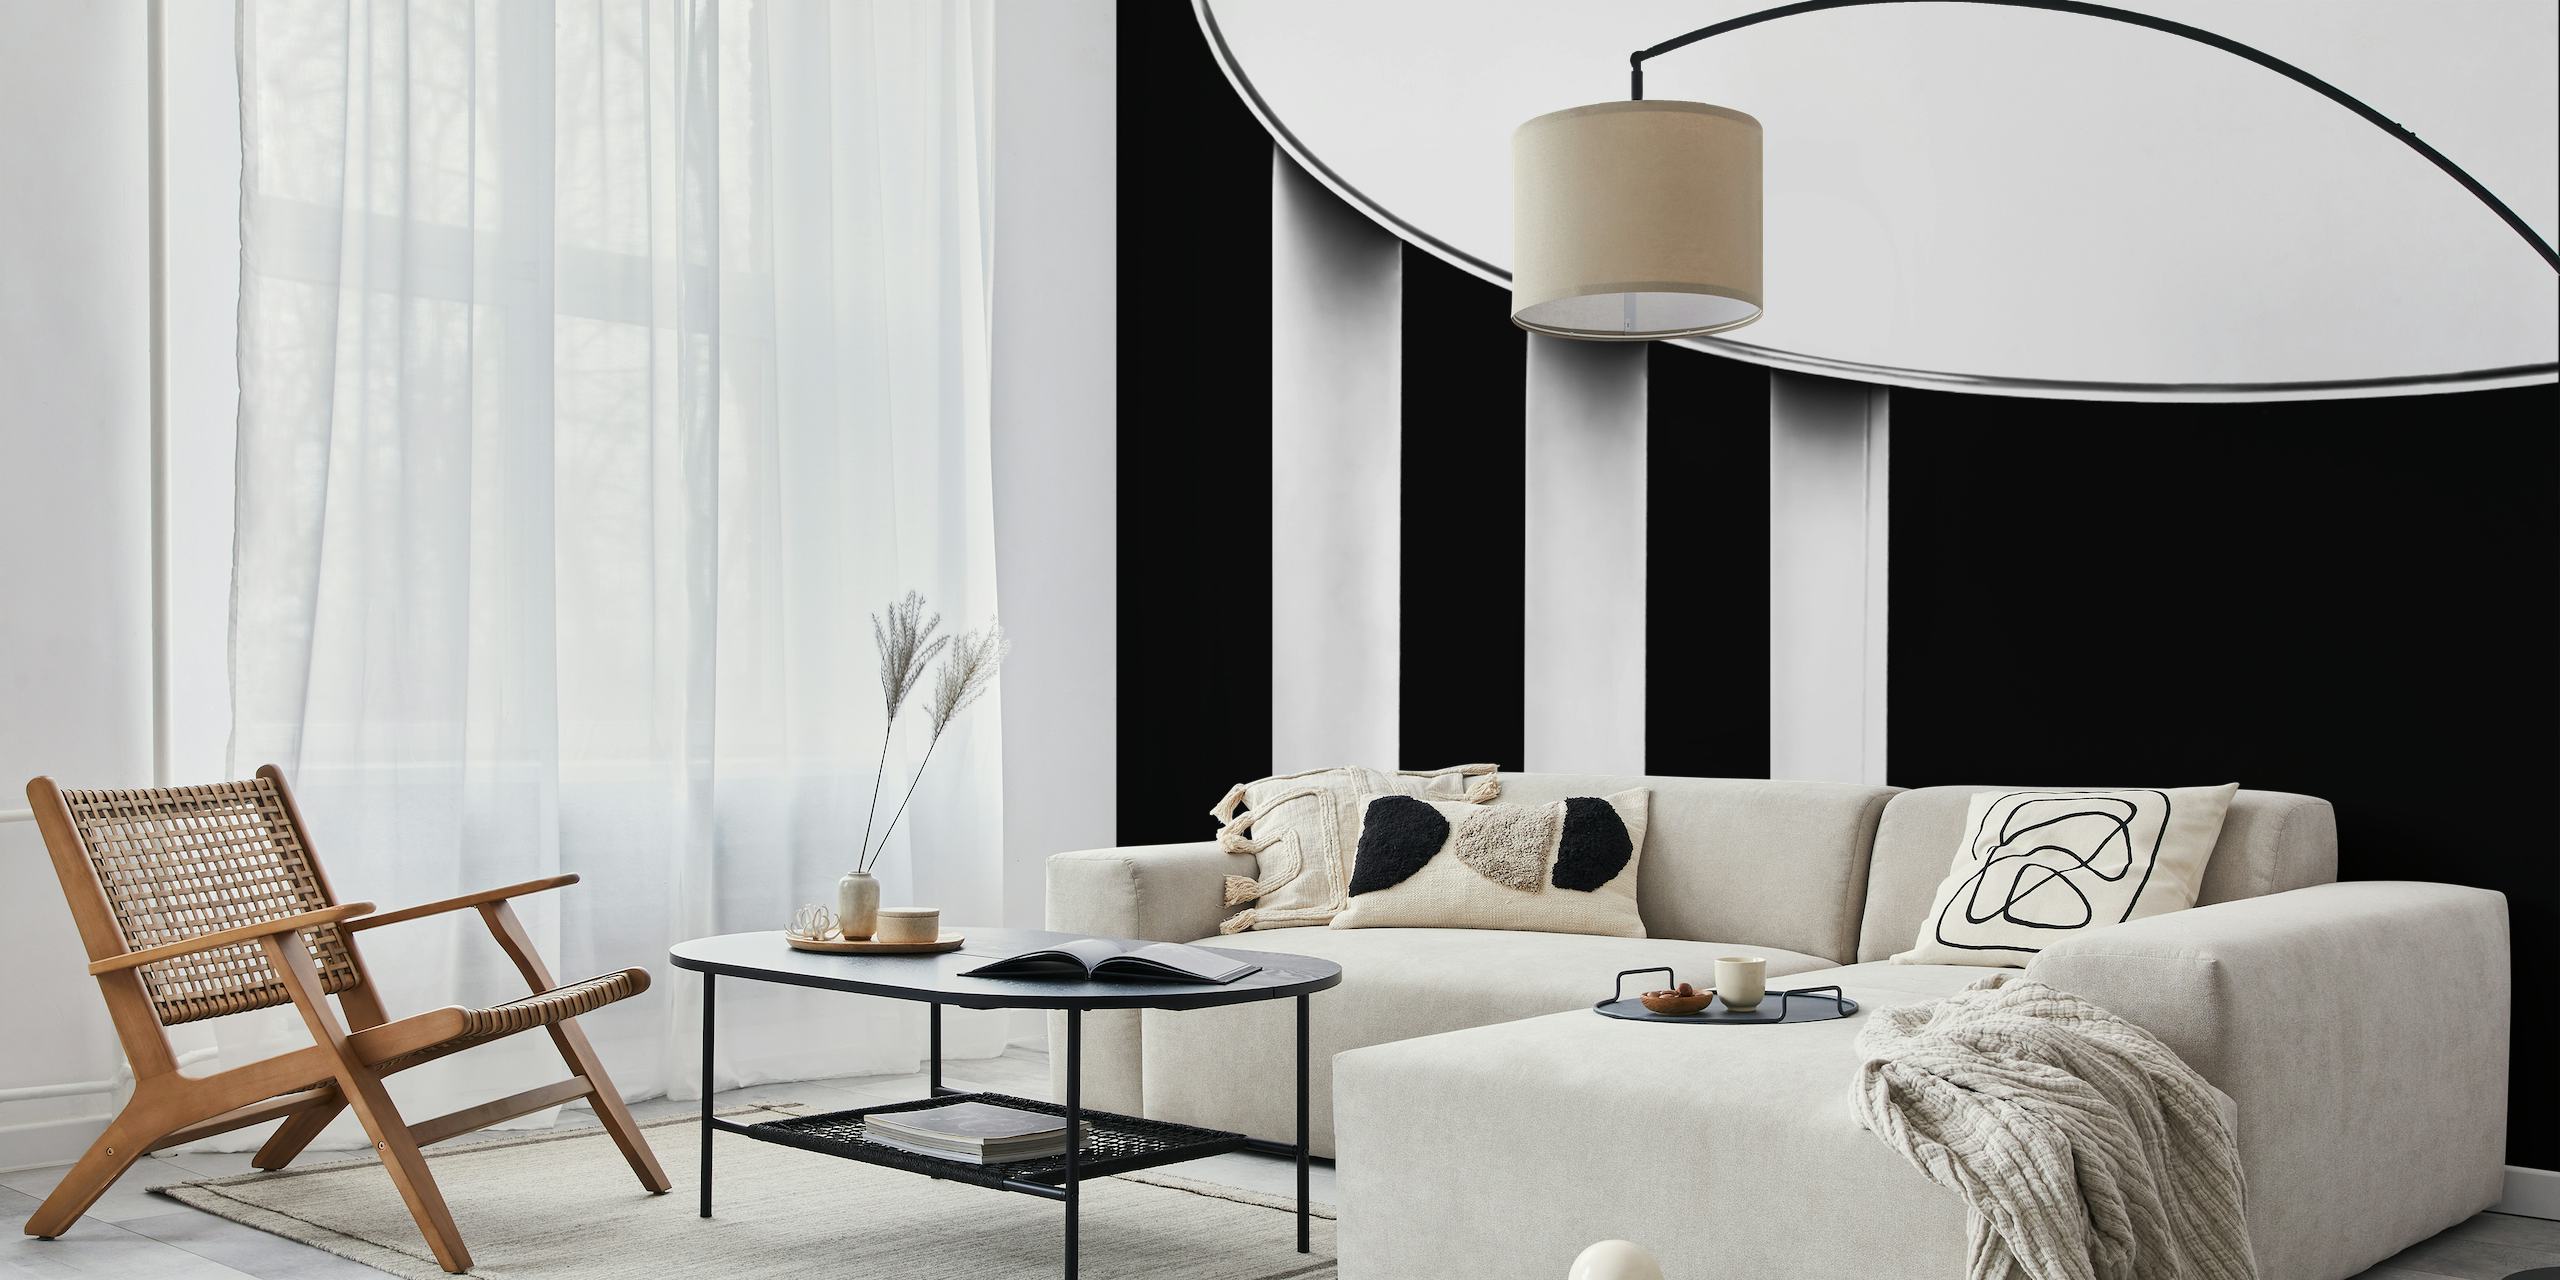 Monochrome abstract wall mural with curved top and vertical lines